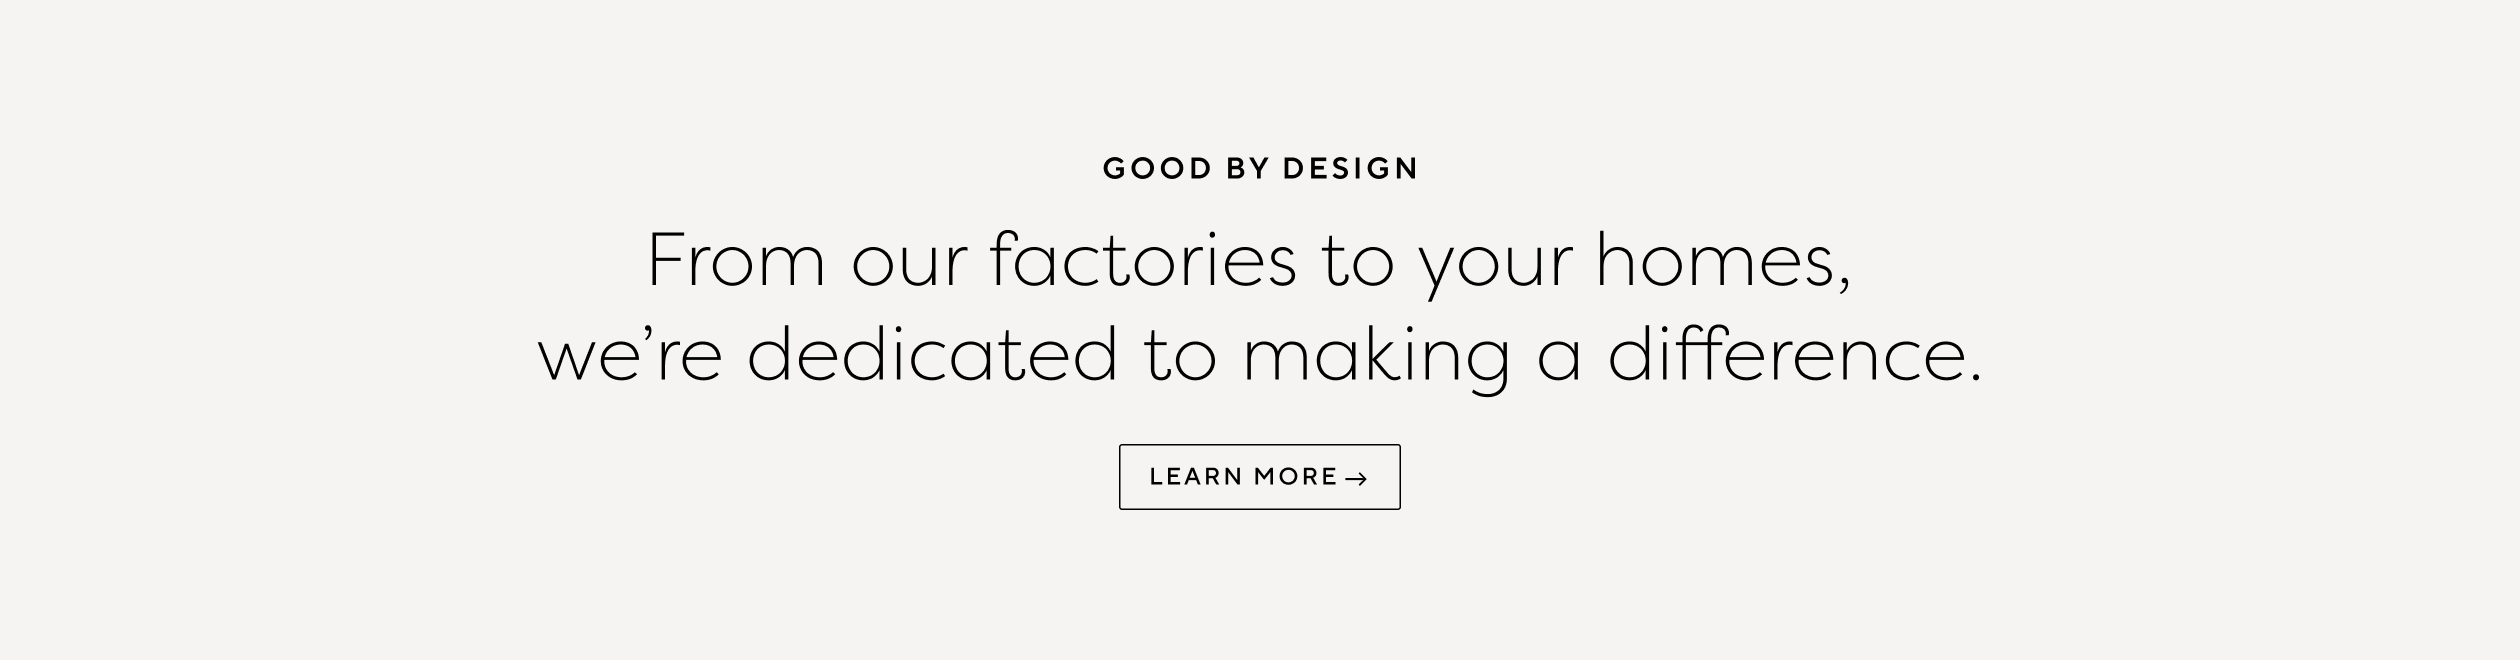 Good By Design. From our factories to your homes, we’re dedicated to making a difference. Learn More.